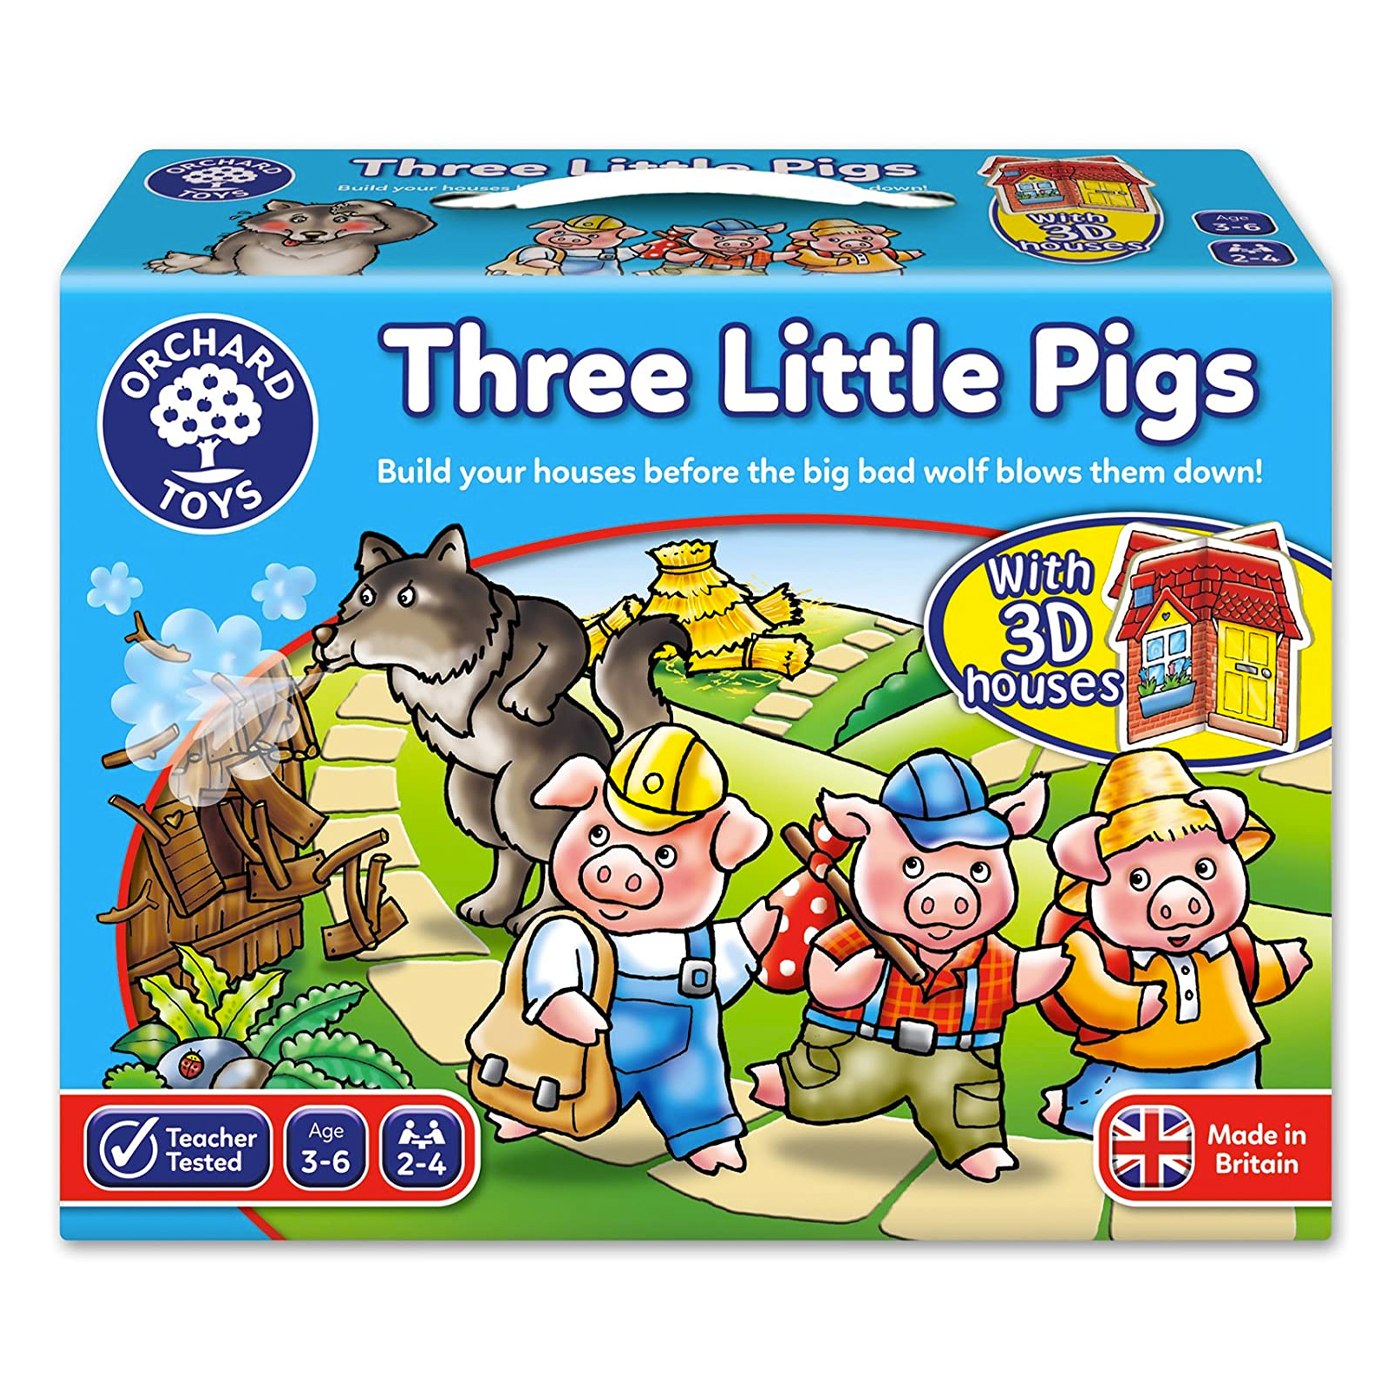 ORCHARD TOYS Orchard Toys Three Little Pigs